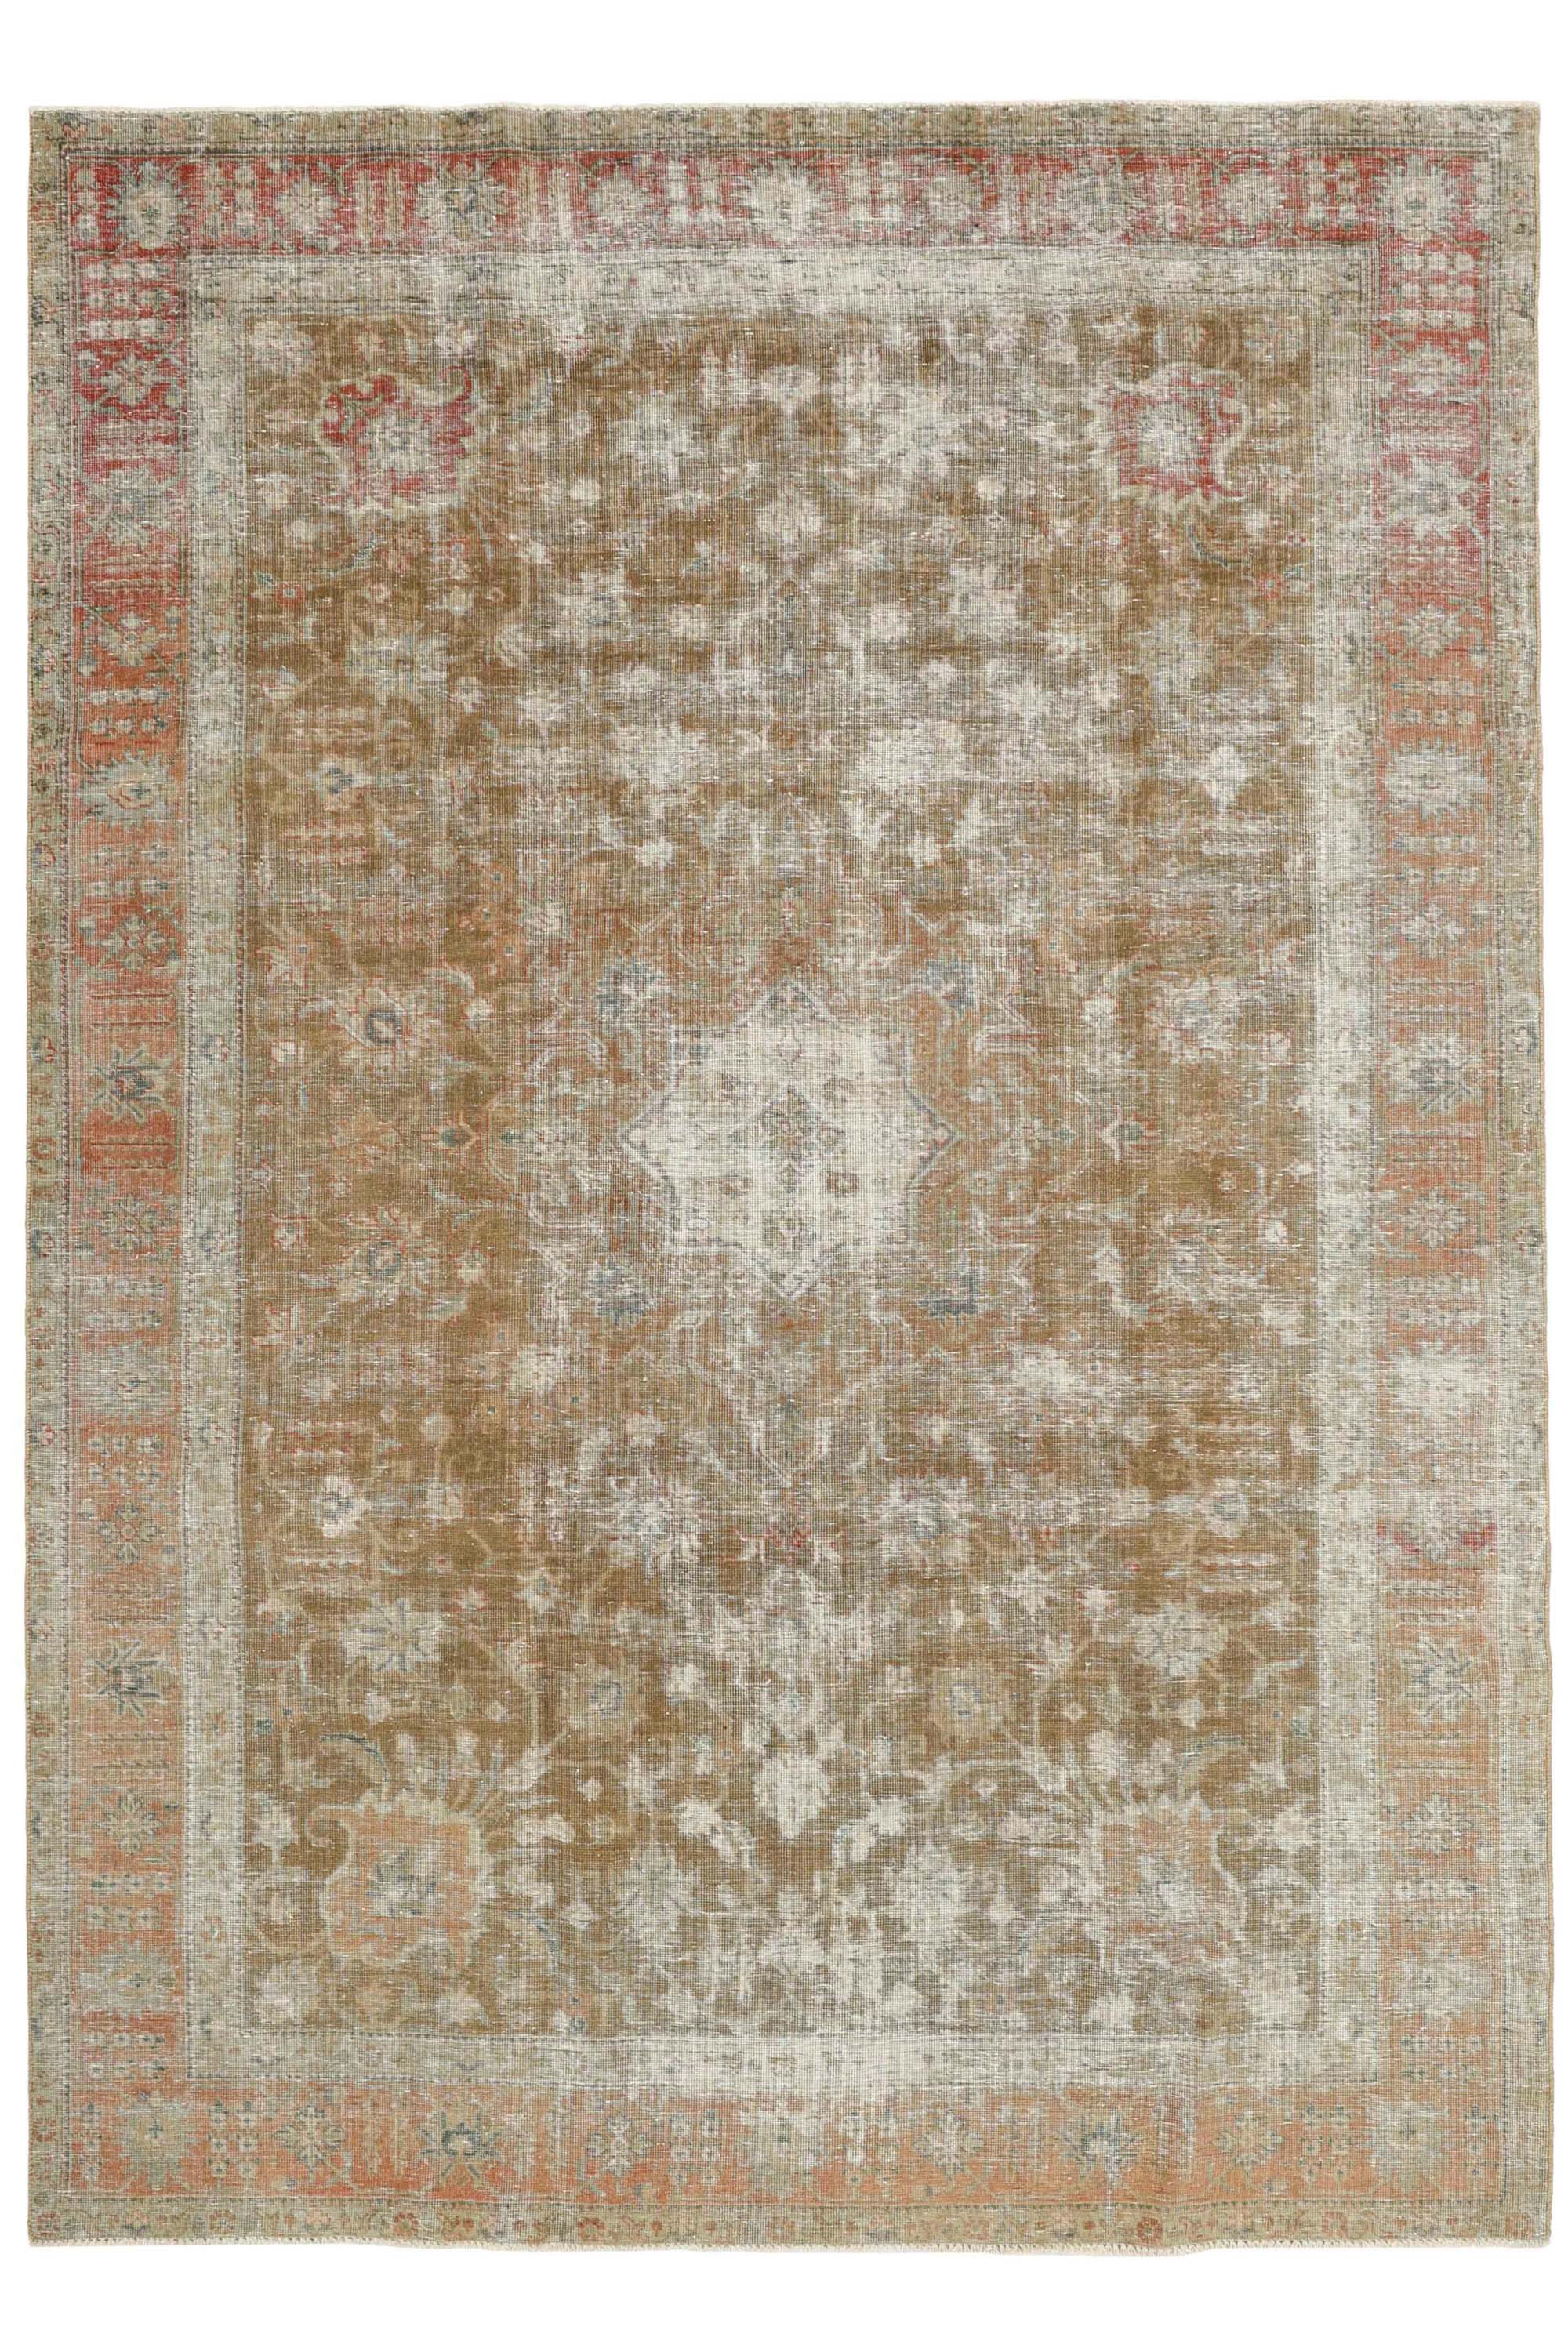 Luxury Vintage Royal Fine rug with Faded bordered pattern